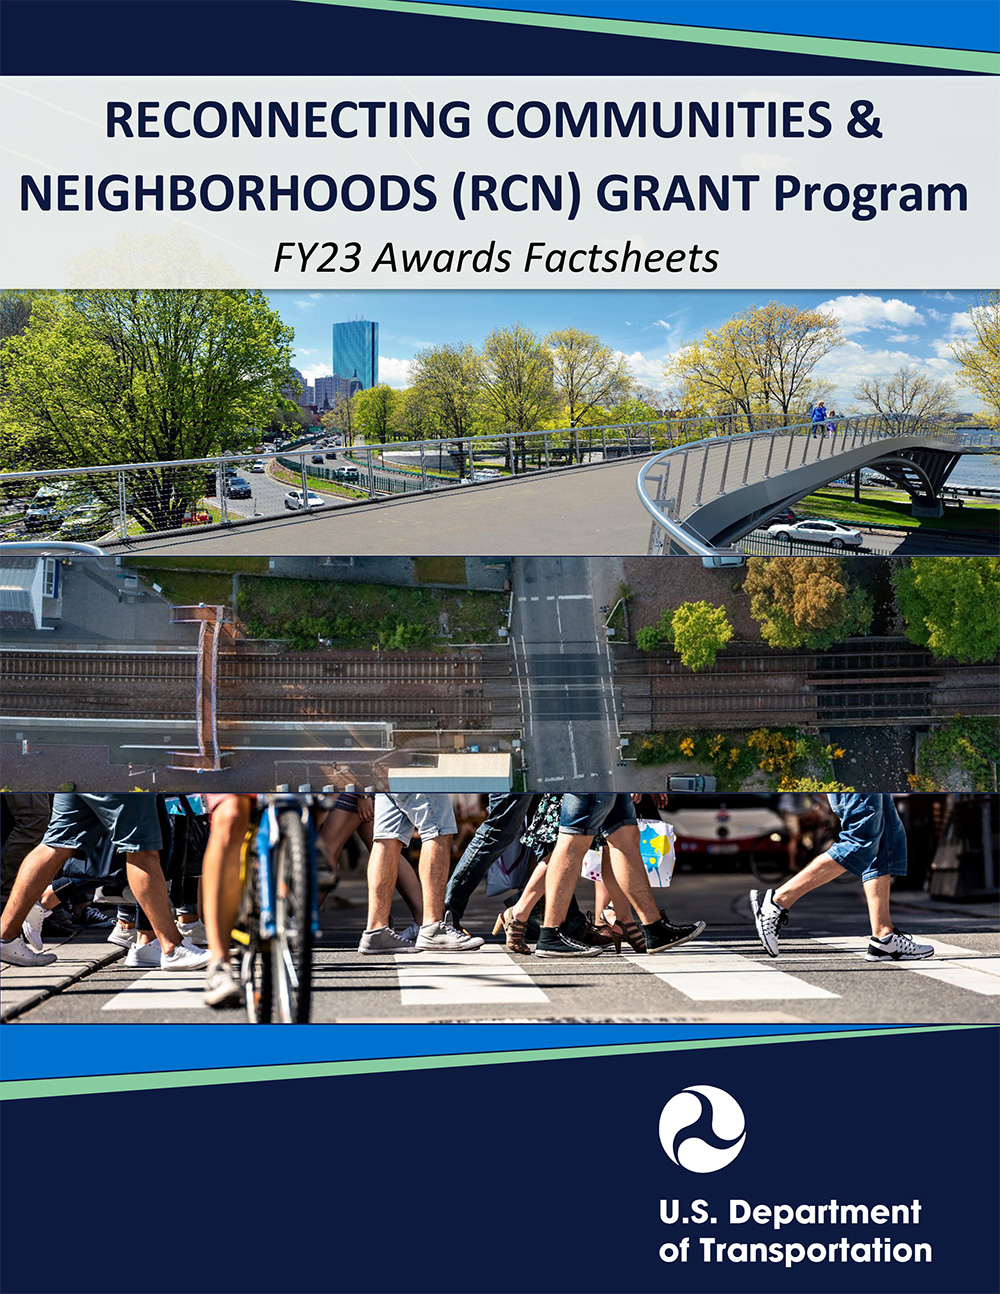 Cover image of the 2023 Reconnecting Communities and Neighborhoods Grant Program.